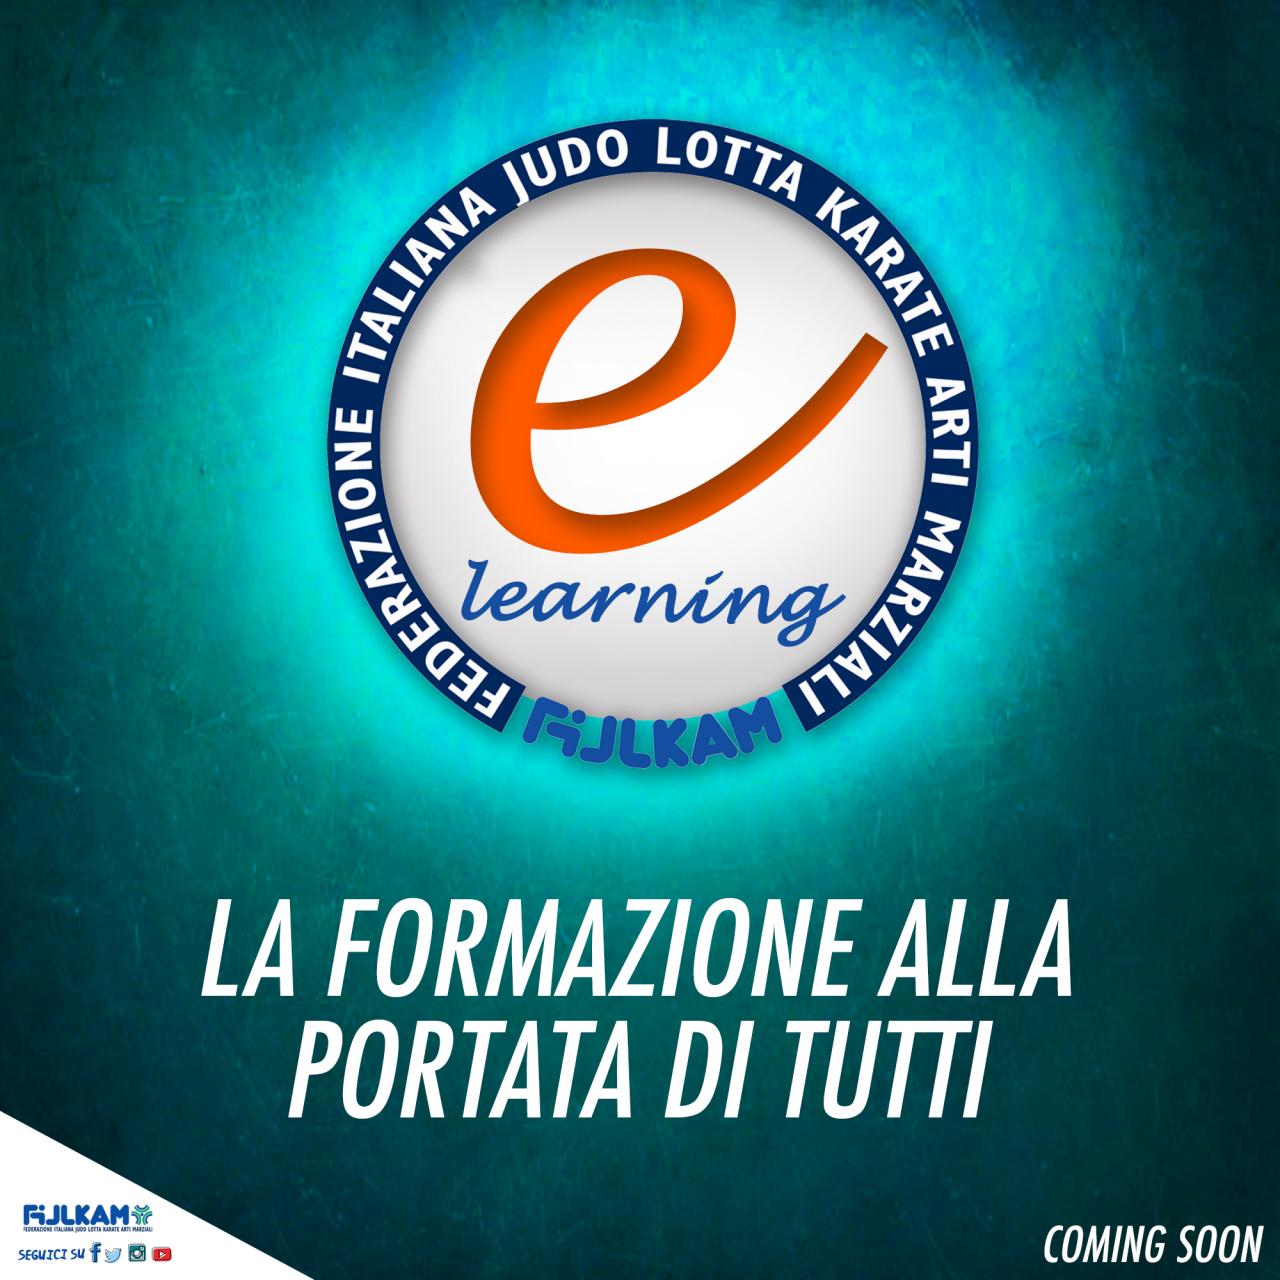 images/large/Elearning_Formazione.jpg